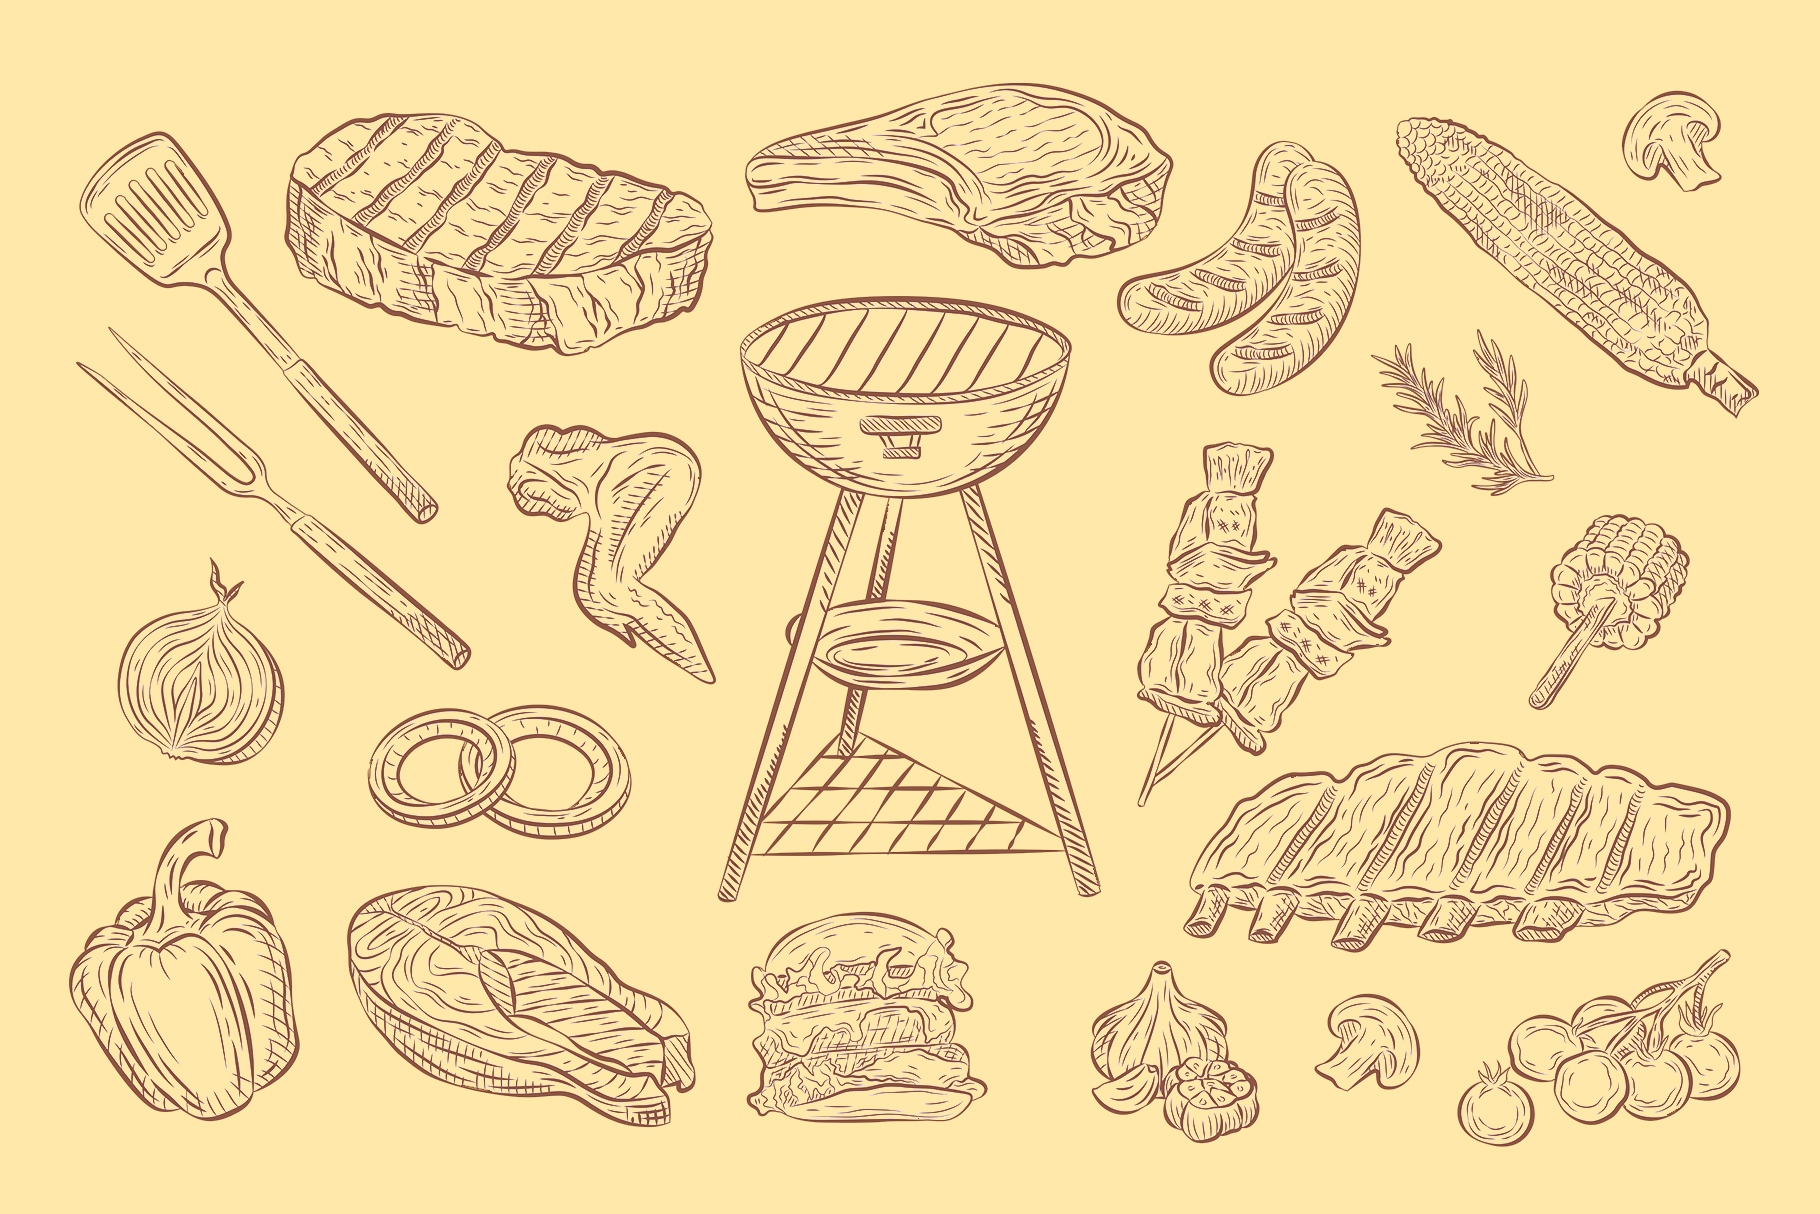 Barbecue BBQ Illustrations (AI, EPS, PNG Format)